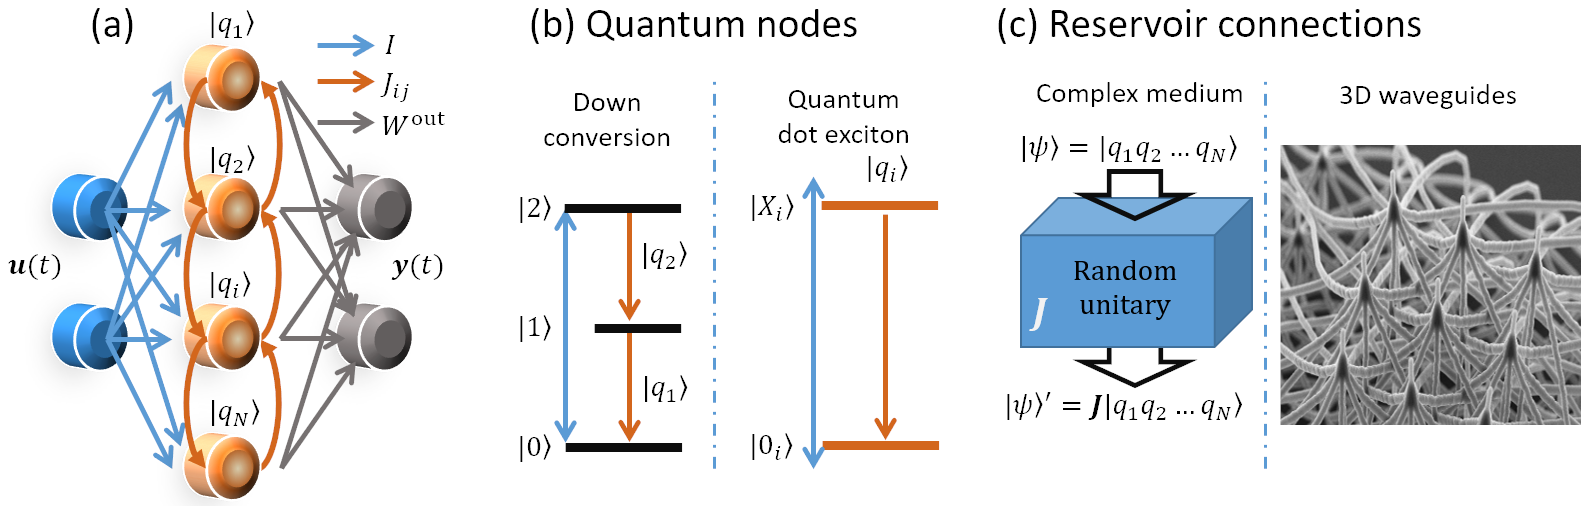 (a) Quantum nodes are randomly coupled, input is projected onto the quantum network, readout weights create the final result. (b) Parametric down conversion or quantum dots in micropillar cavities create quantum nodes. (c) Reservoir connections are created via complex transparent media or 3D photonic waveguides.